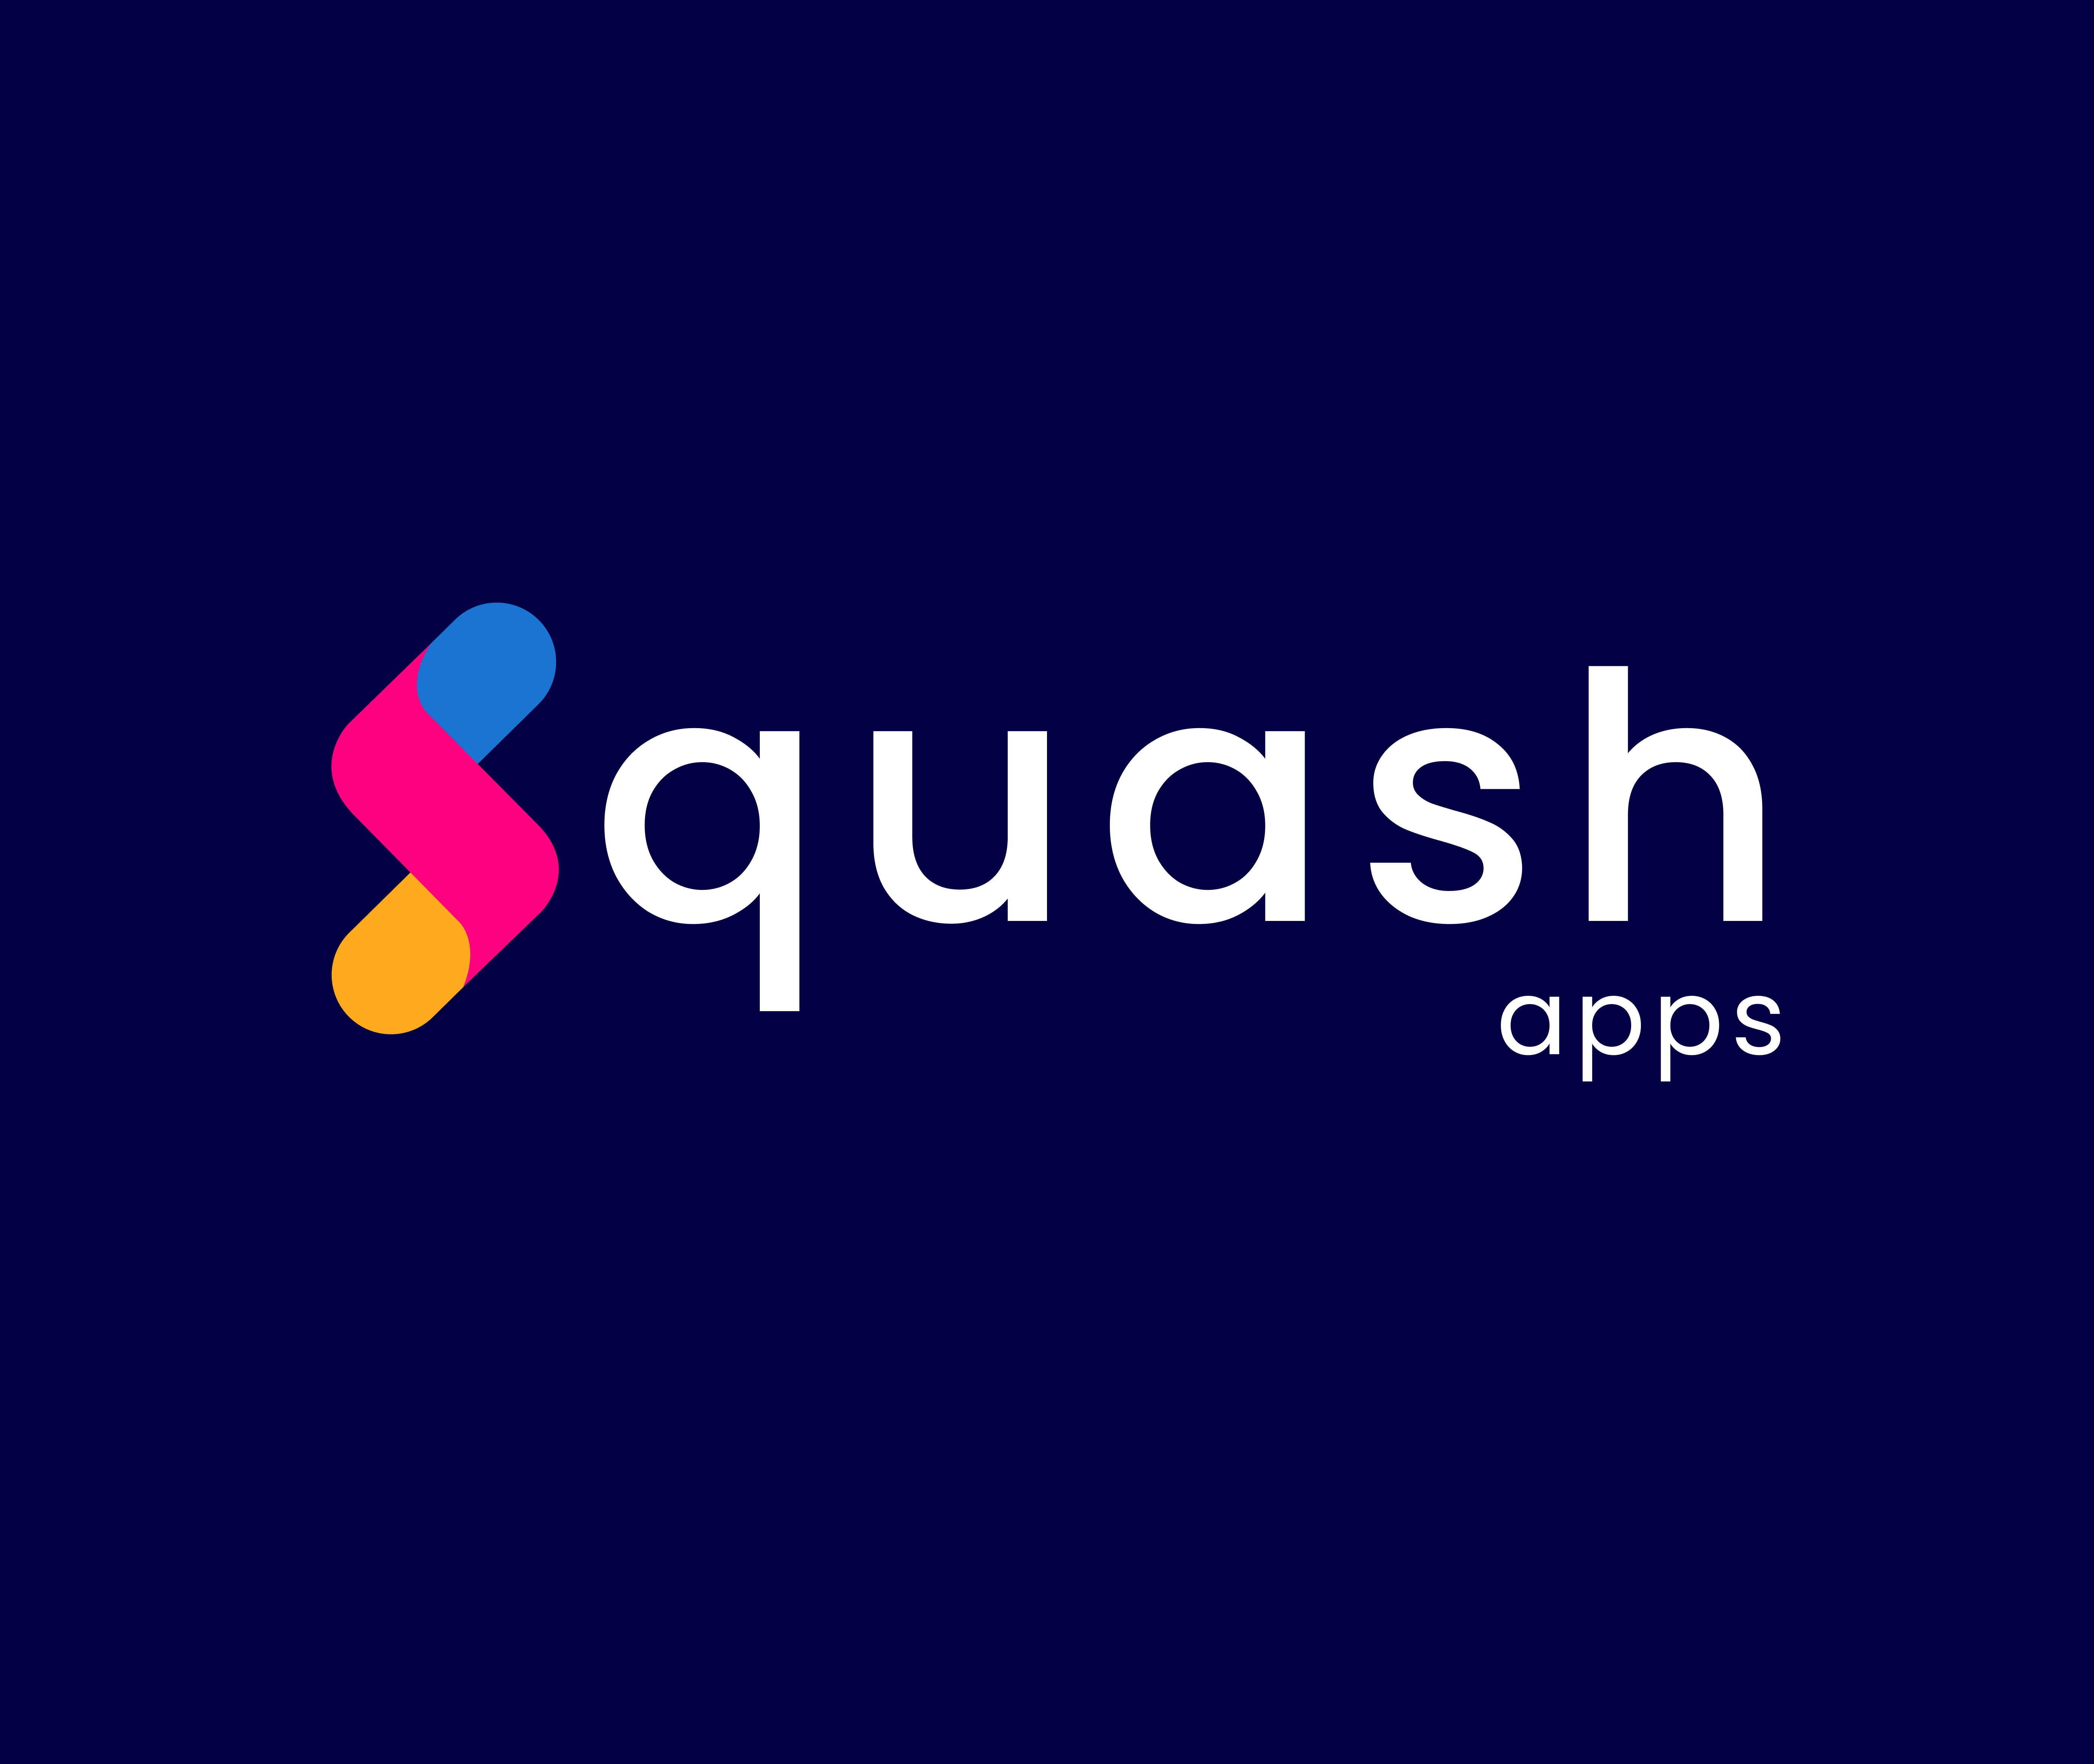 Squash Apps Private Limited